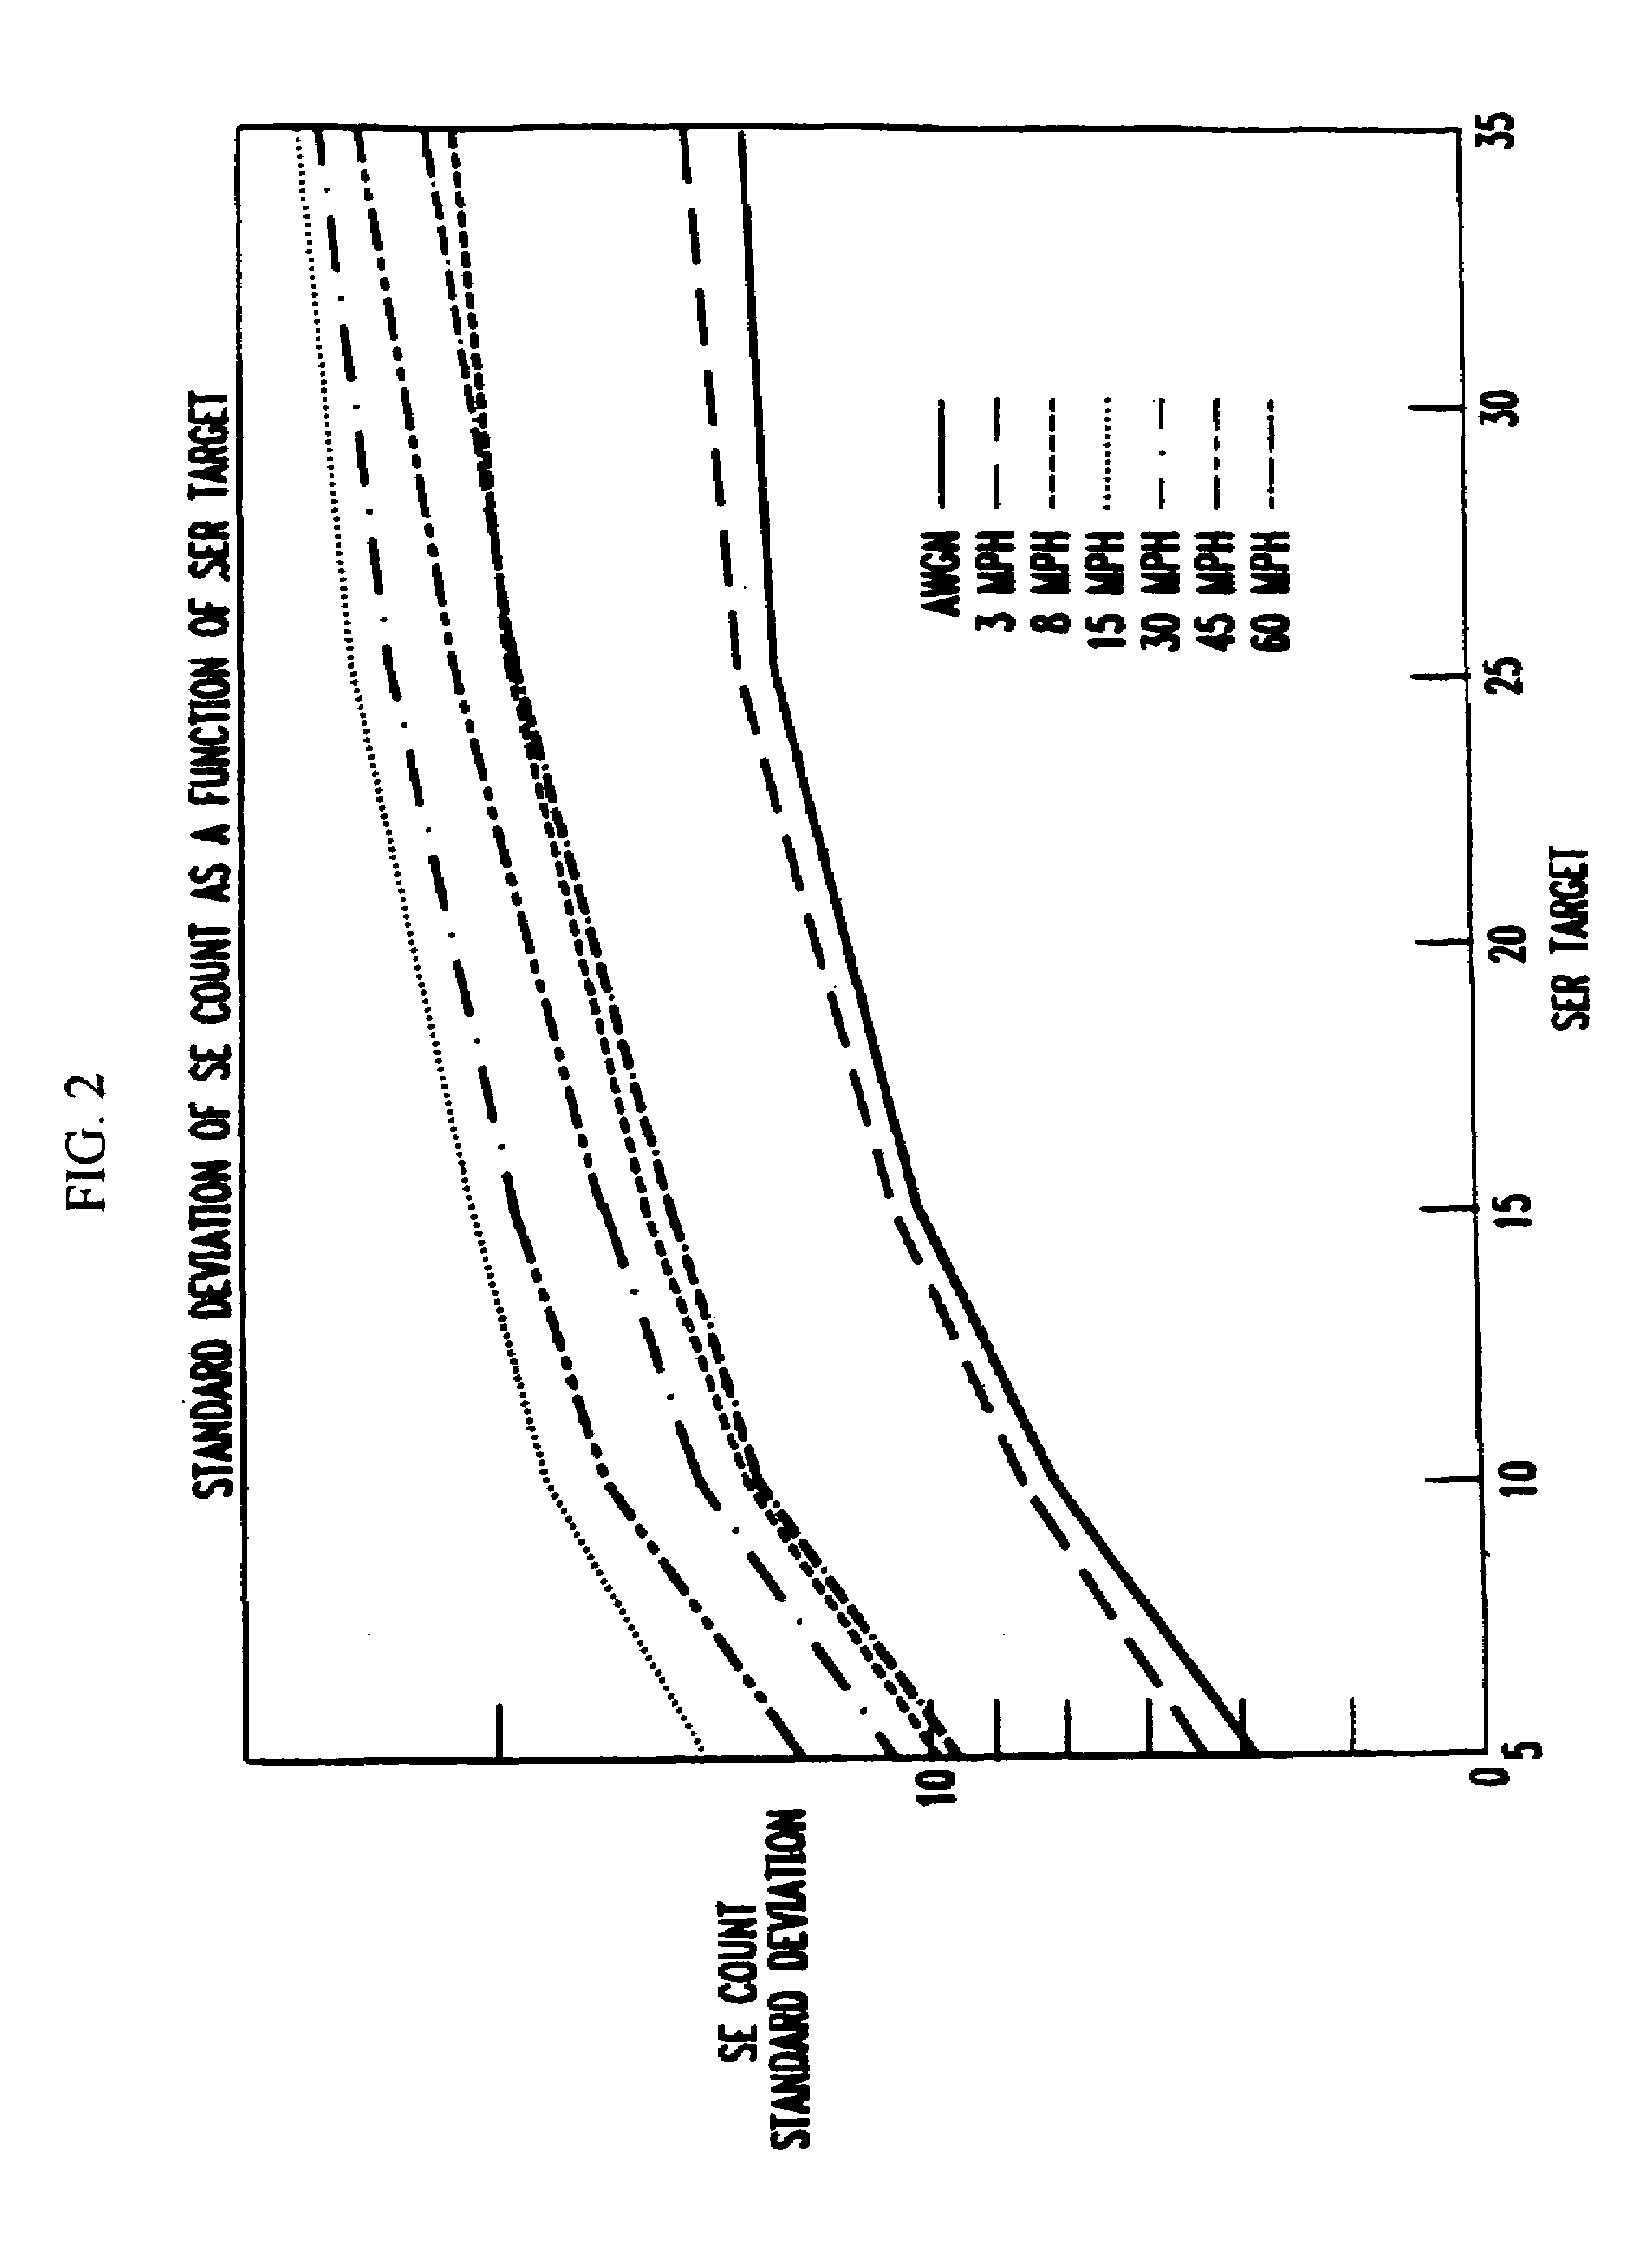 Reverse link outer loop power control with adaptive compensation